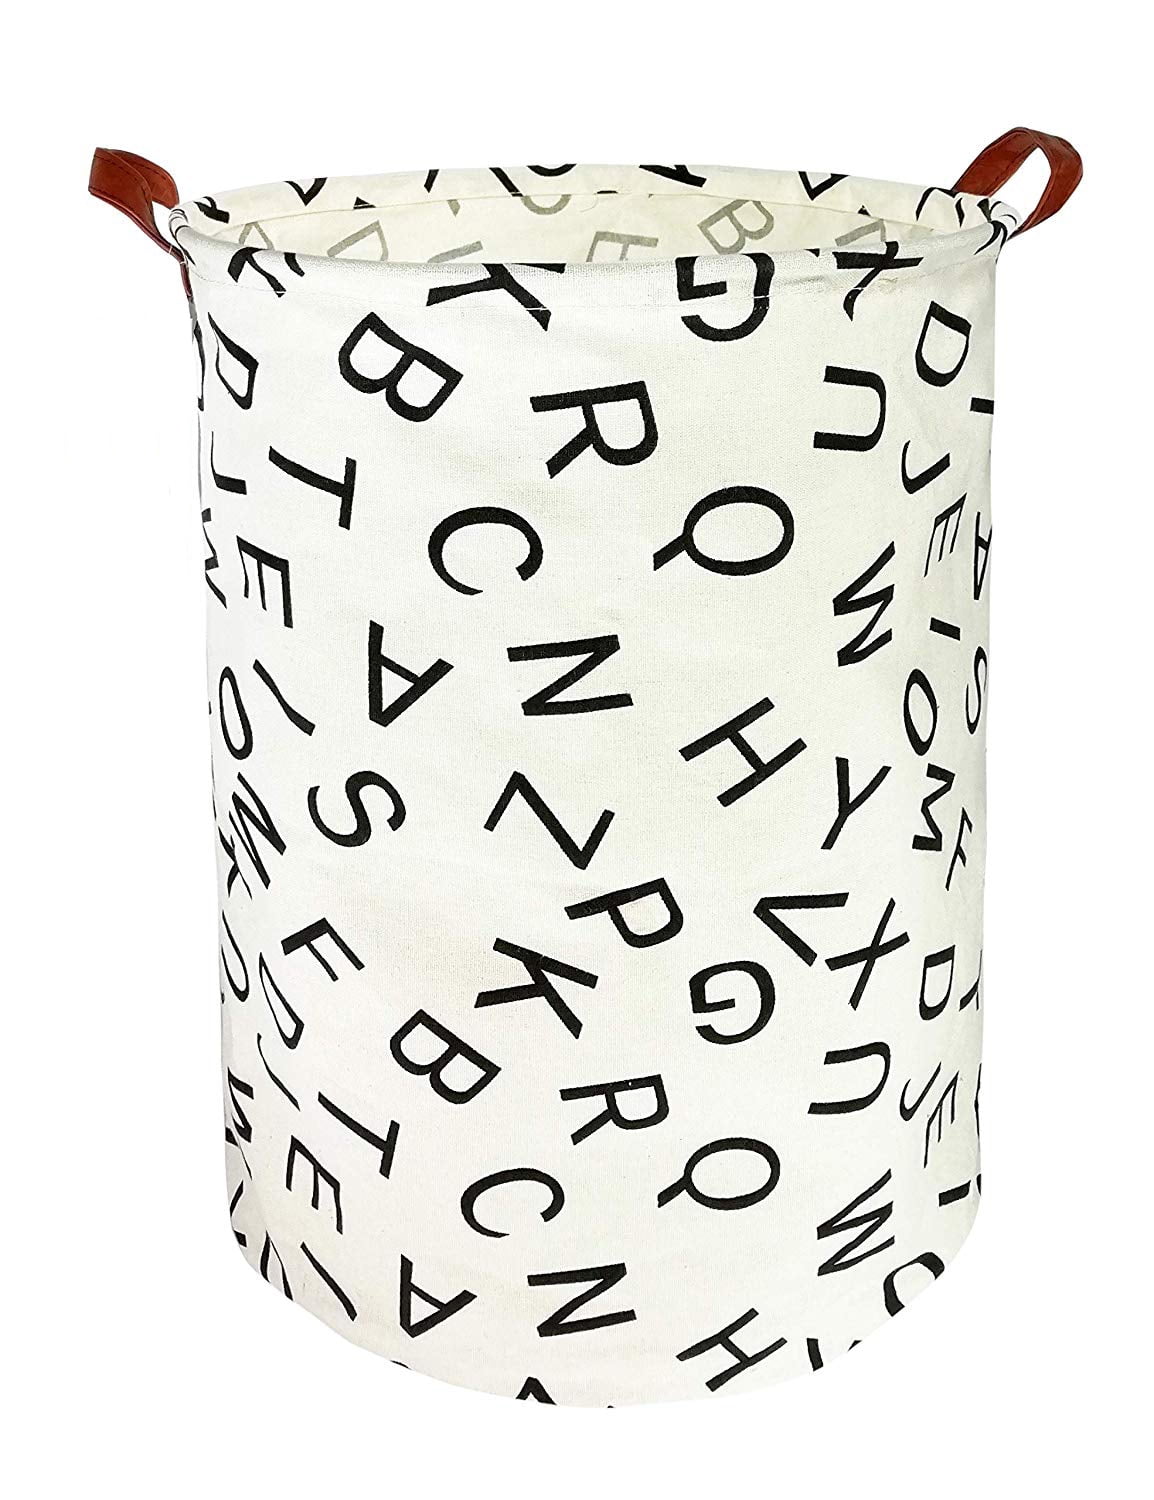 Giraffe Waterproof Coating Storage Basket with Handles Kids Room Children Laundry Hamper Toy Bins 19.6 Inches Large Round Collapsible Canvas Organizer Bins for Nursery Dirty Clothes 